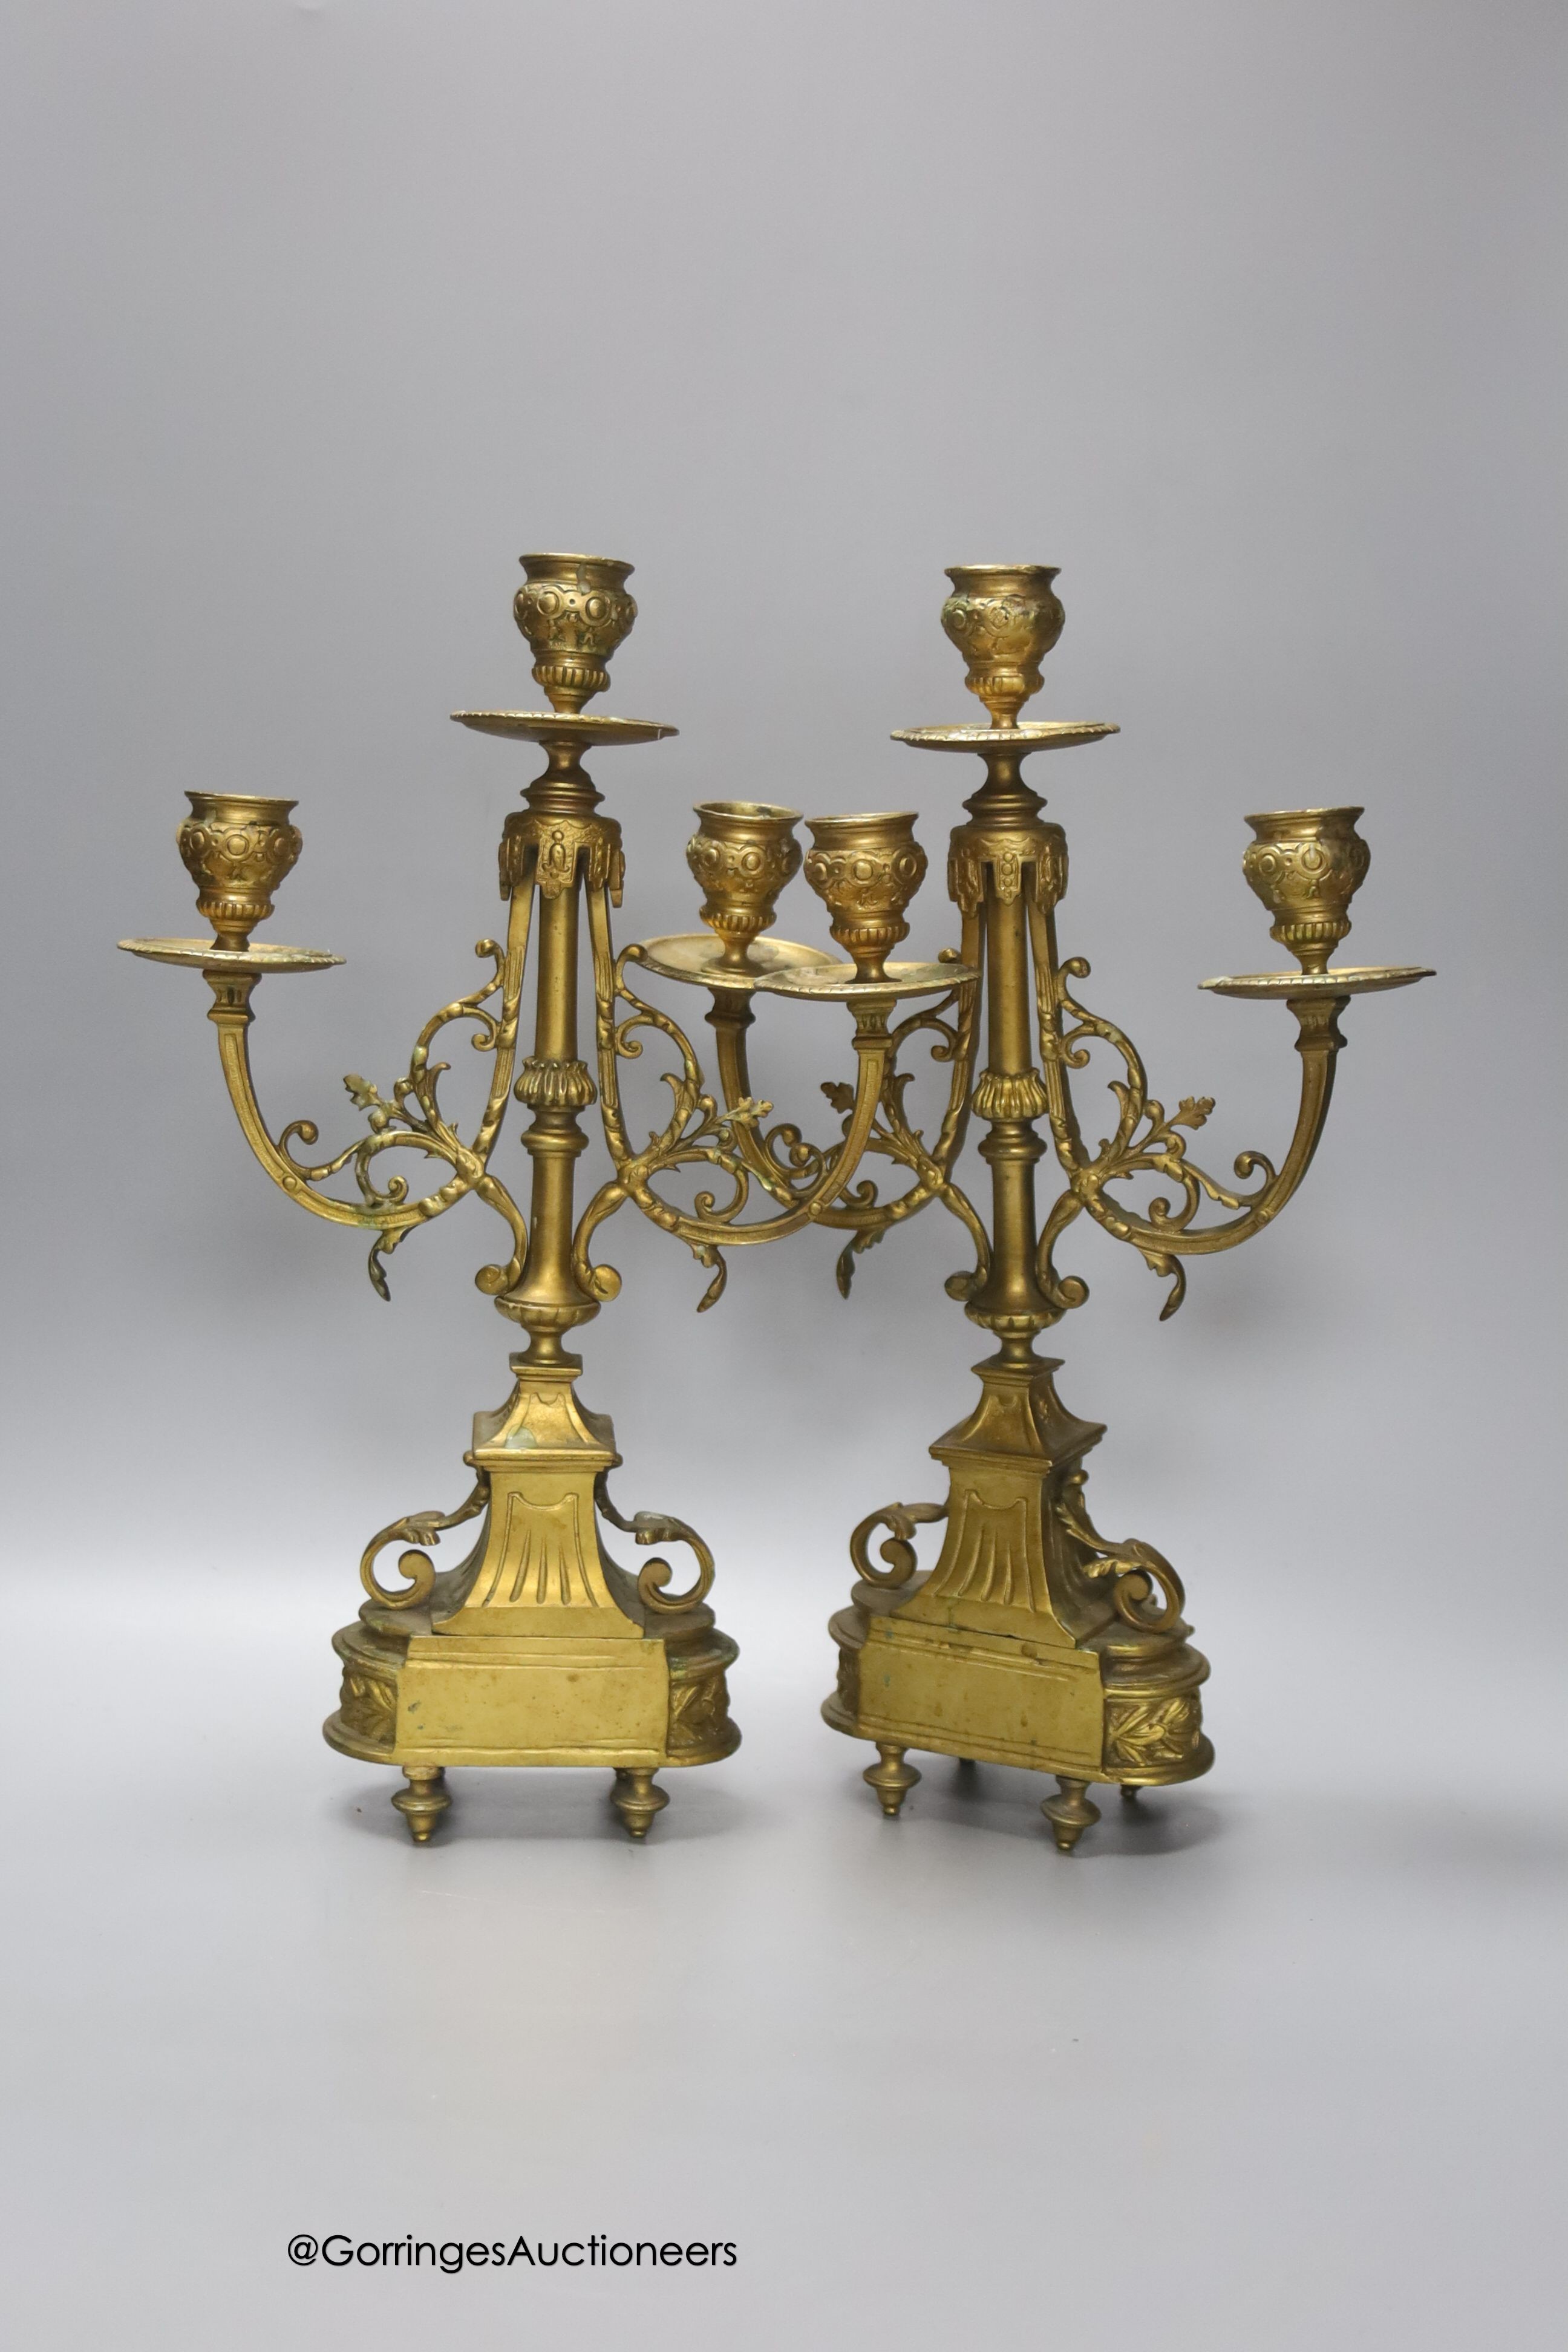 A pair of 19th century French ormolu candelabra, height 34cm